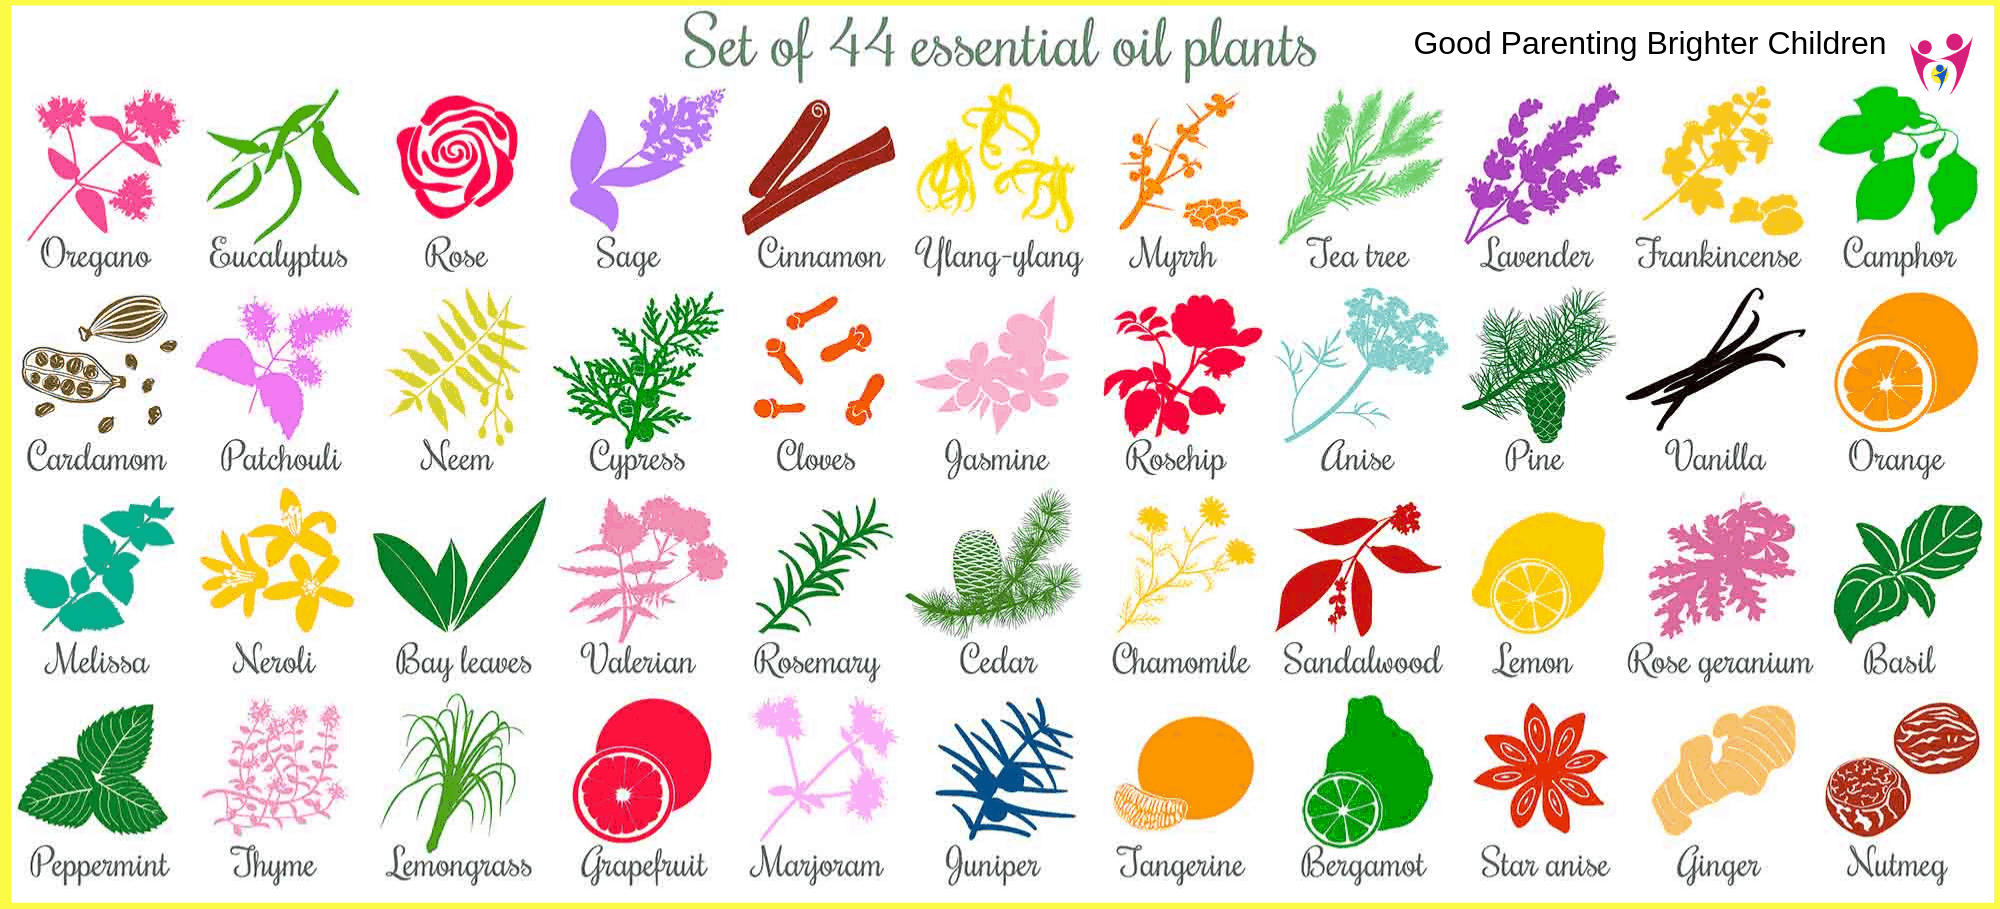 benefits of essential oils chart